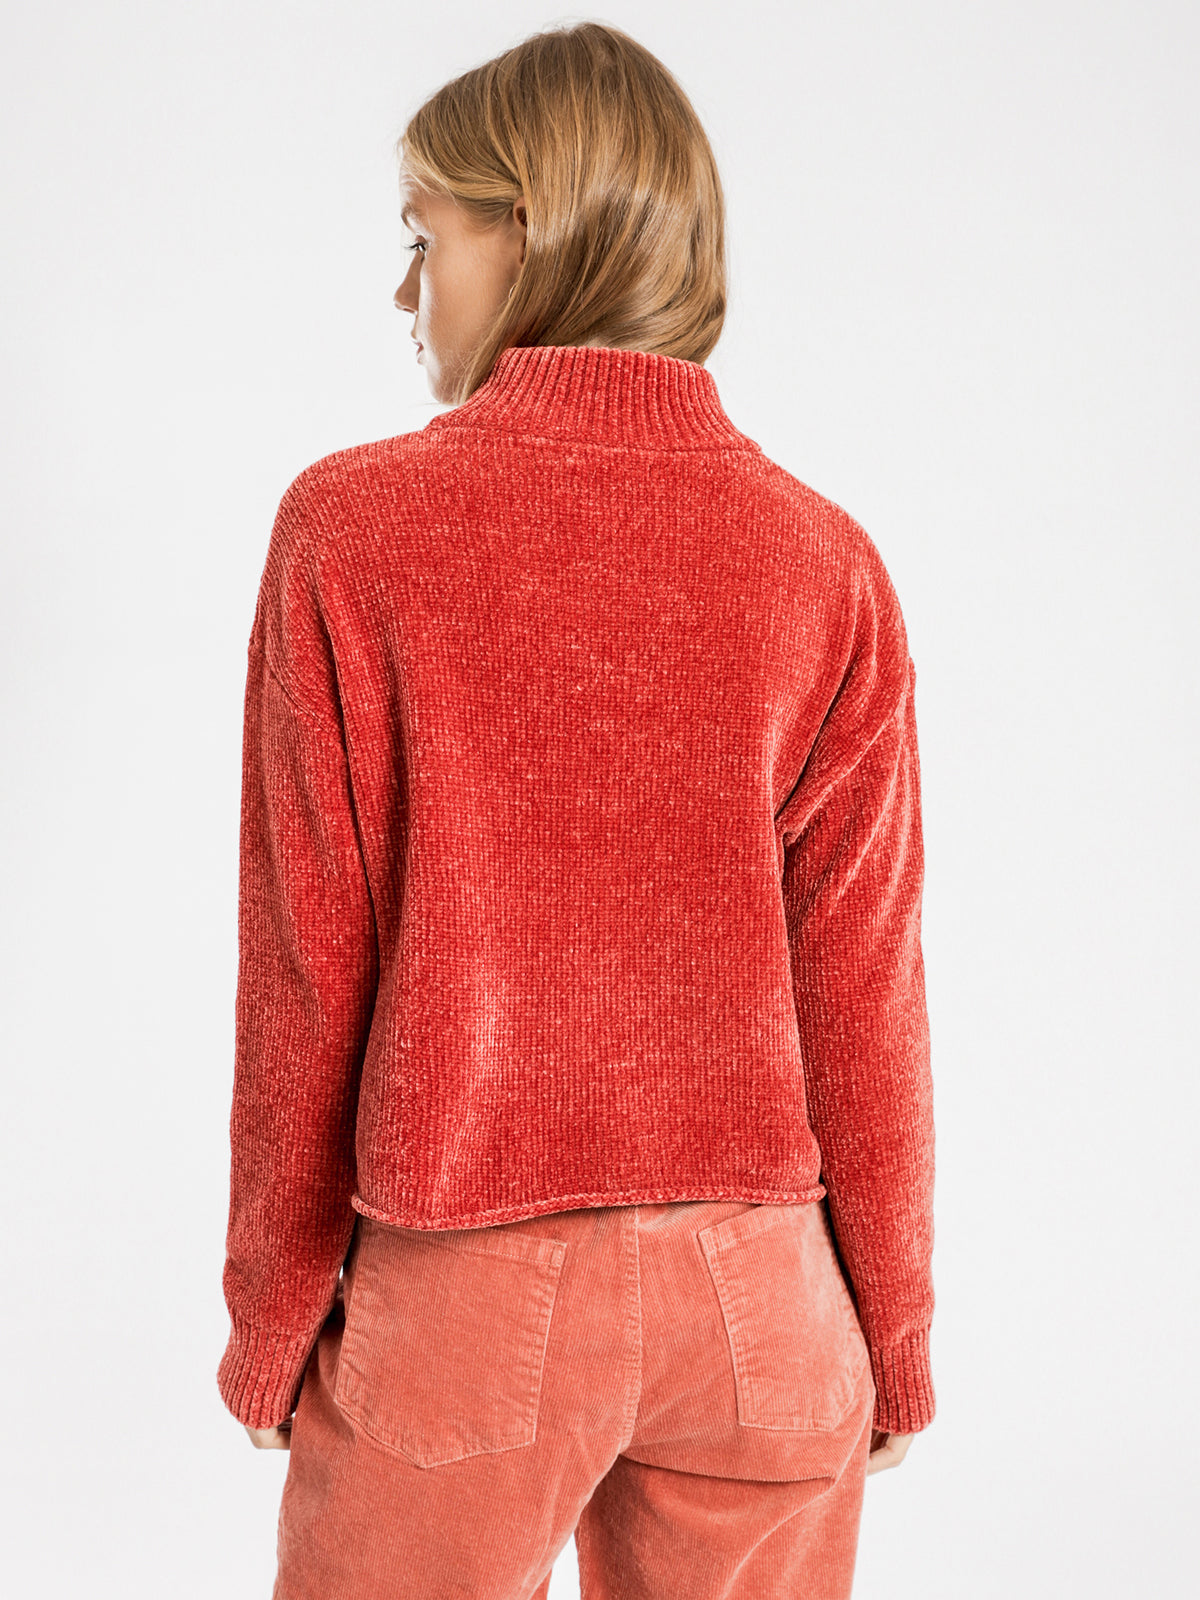 Chenille Crew Neck Knit in Dusty Rose